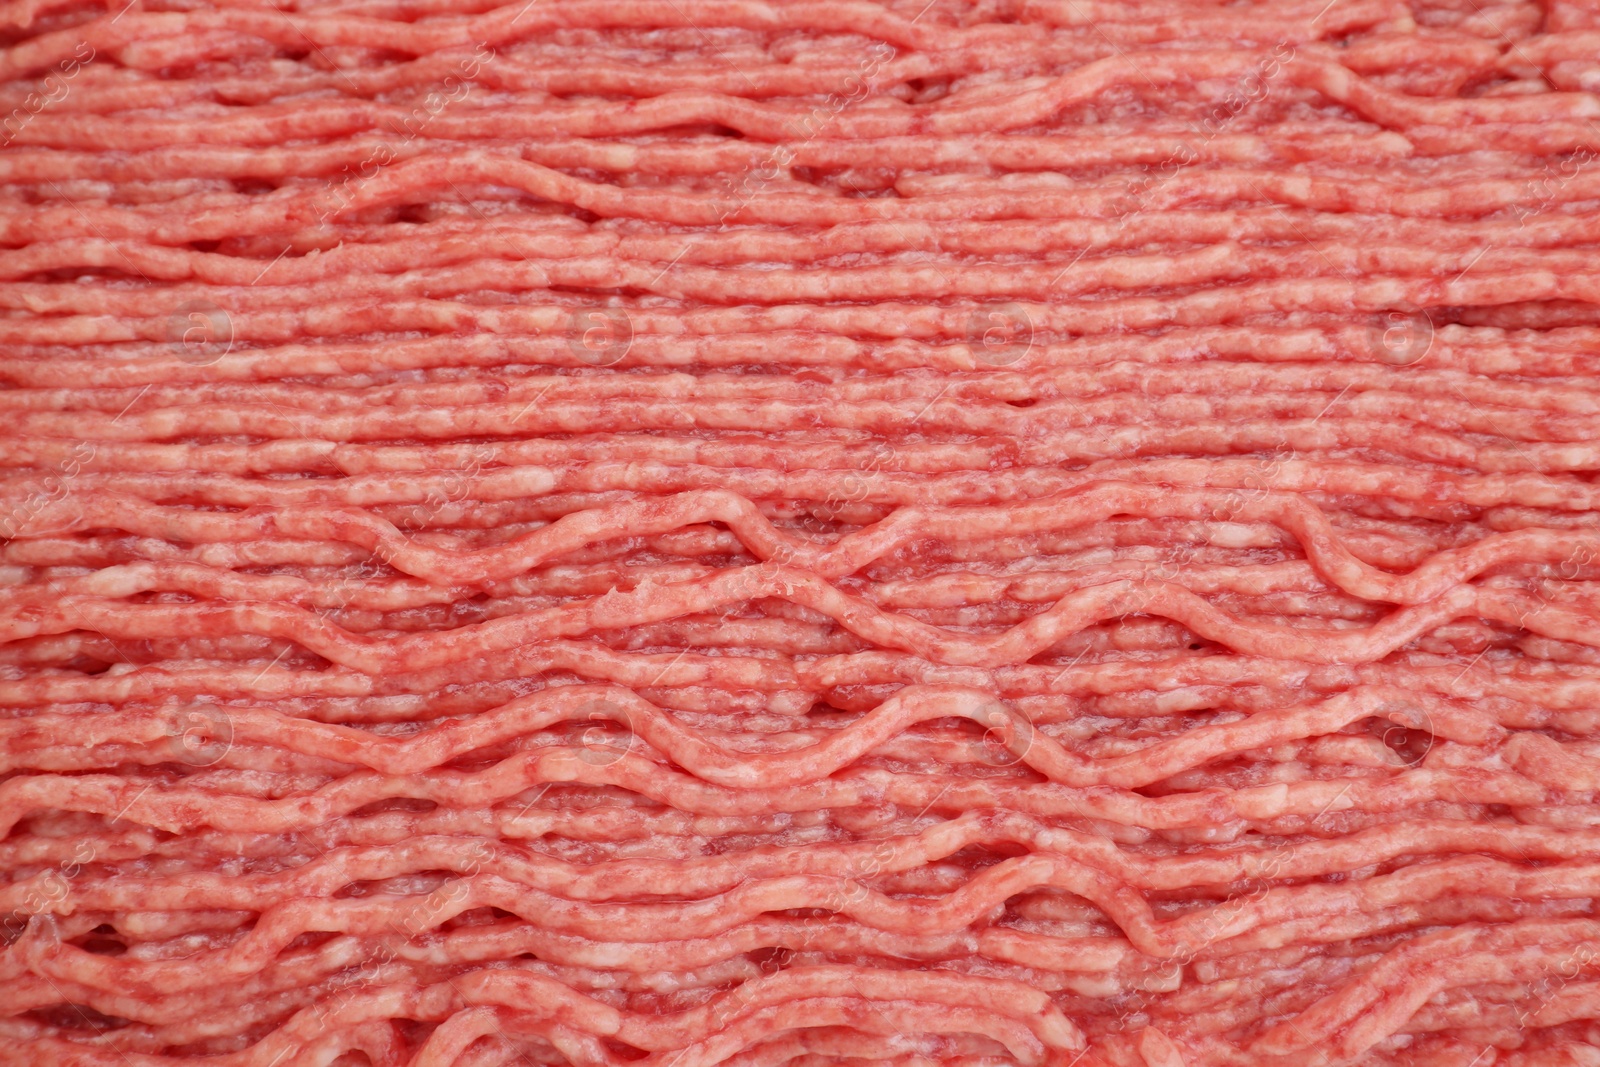 Photo of Raw fresh minced meat as background, closeup